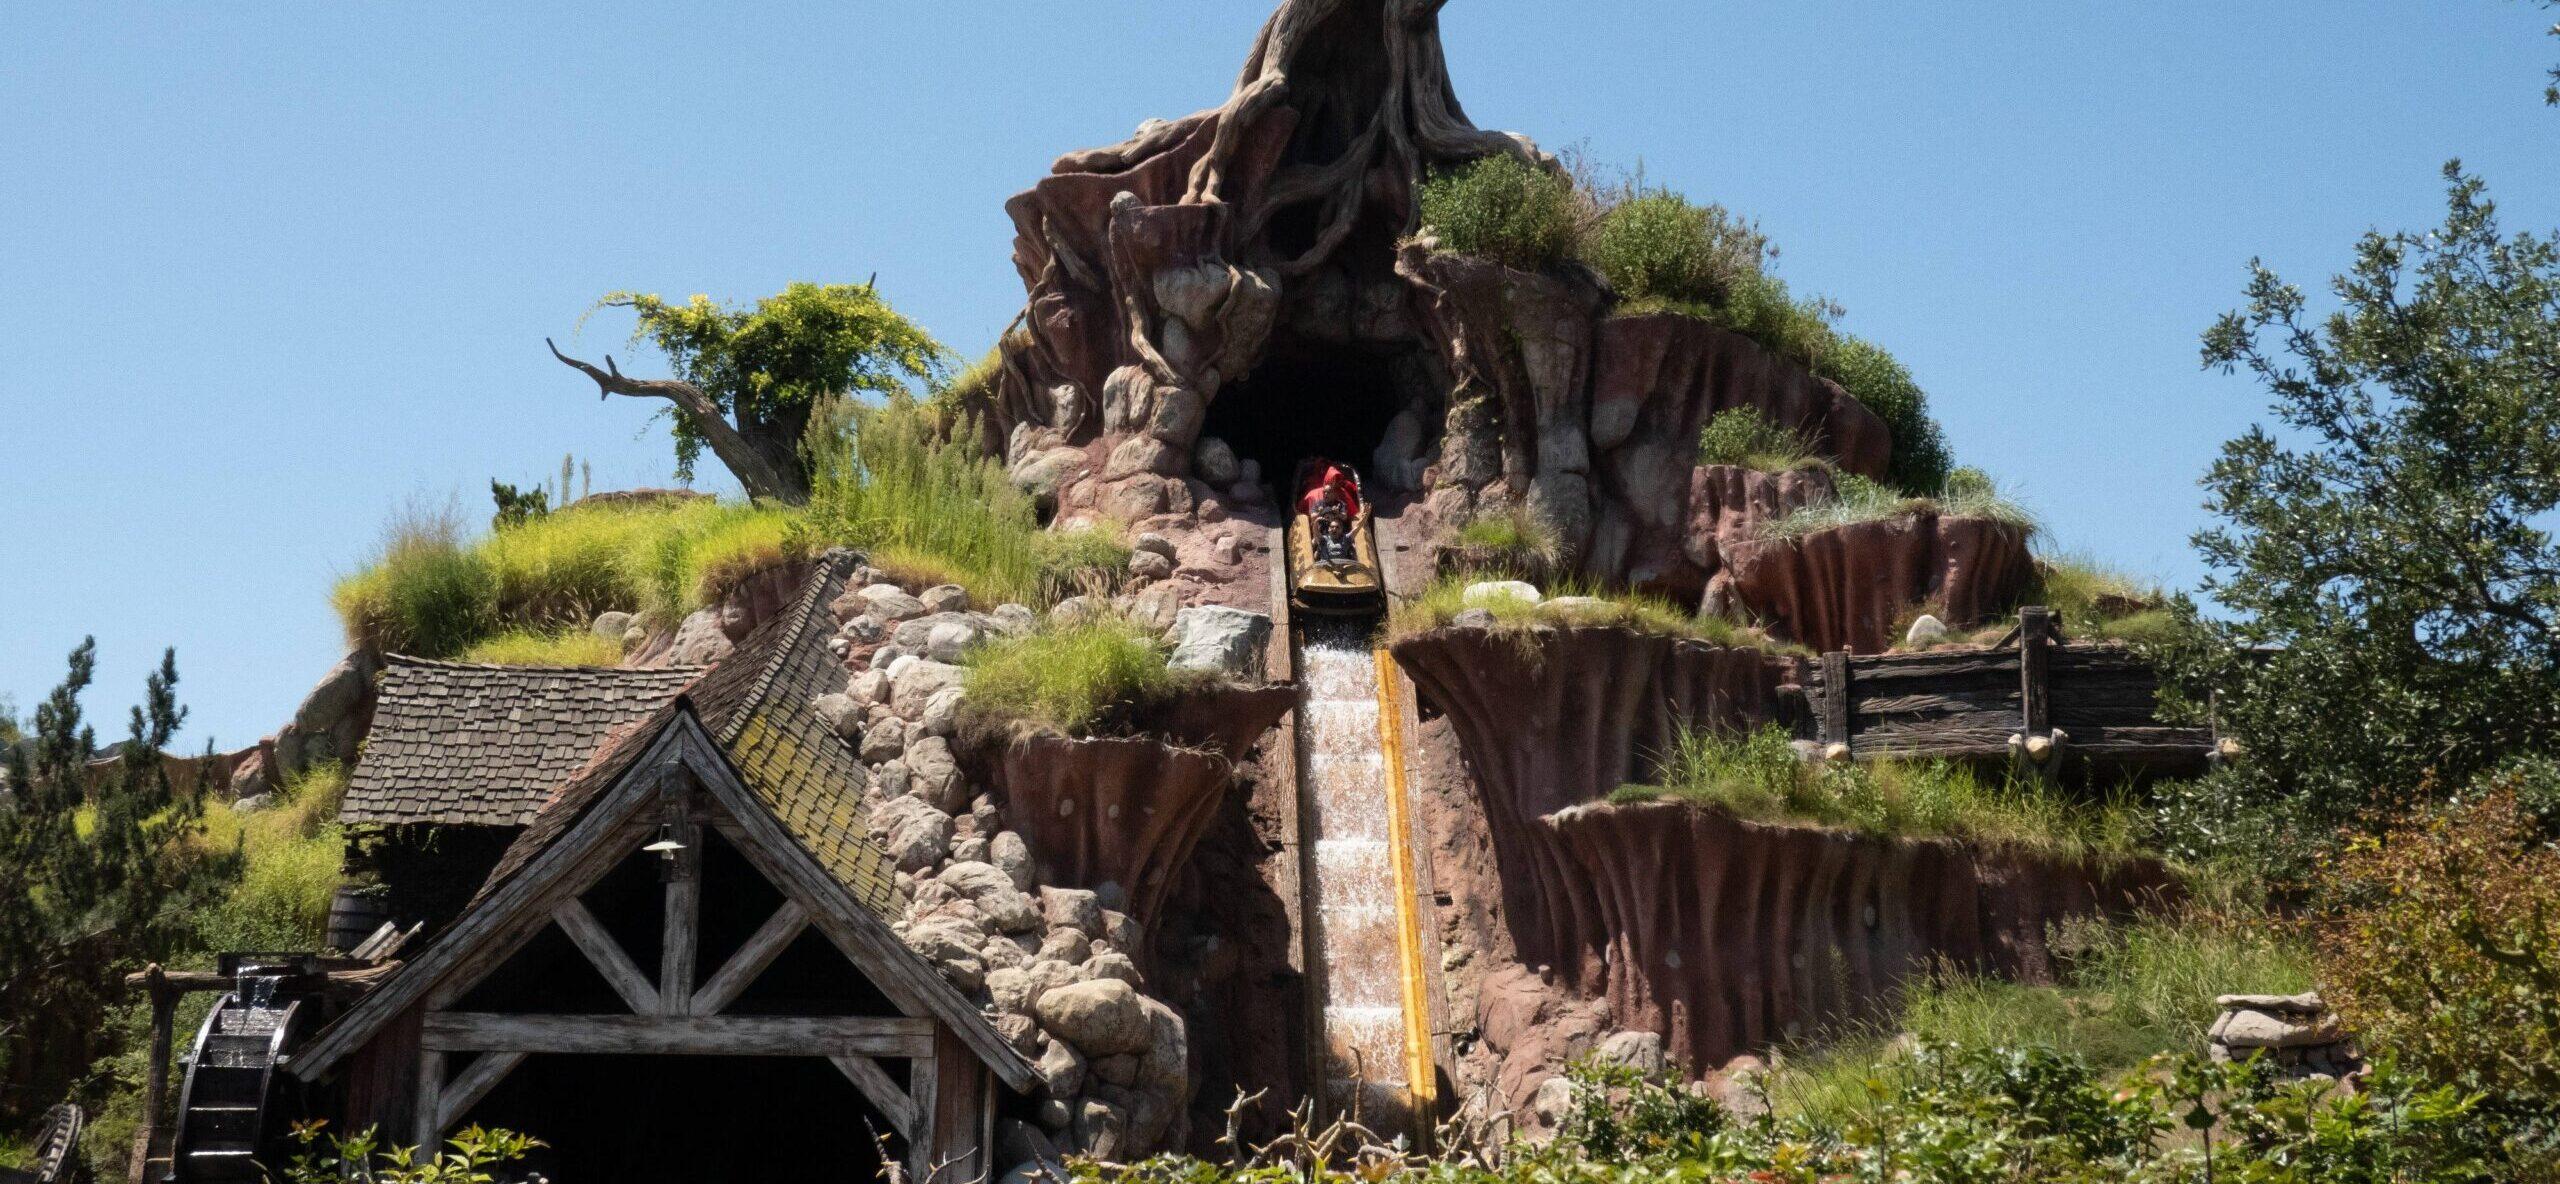 Splash Mountain Fiasco: Guest Jumps Out Of Moving Ride Vehicle